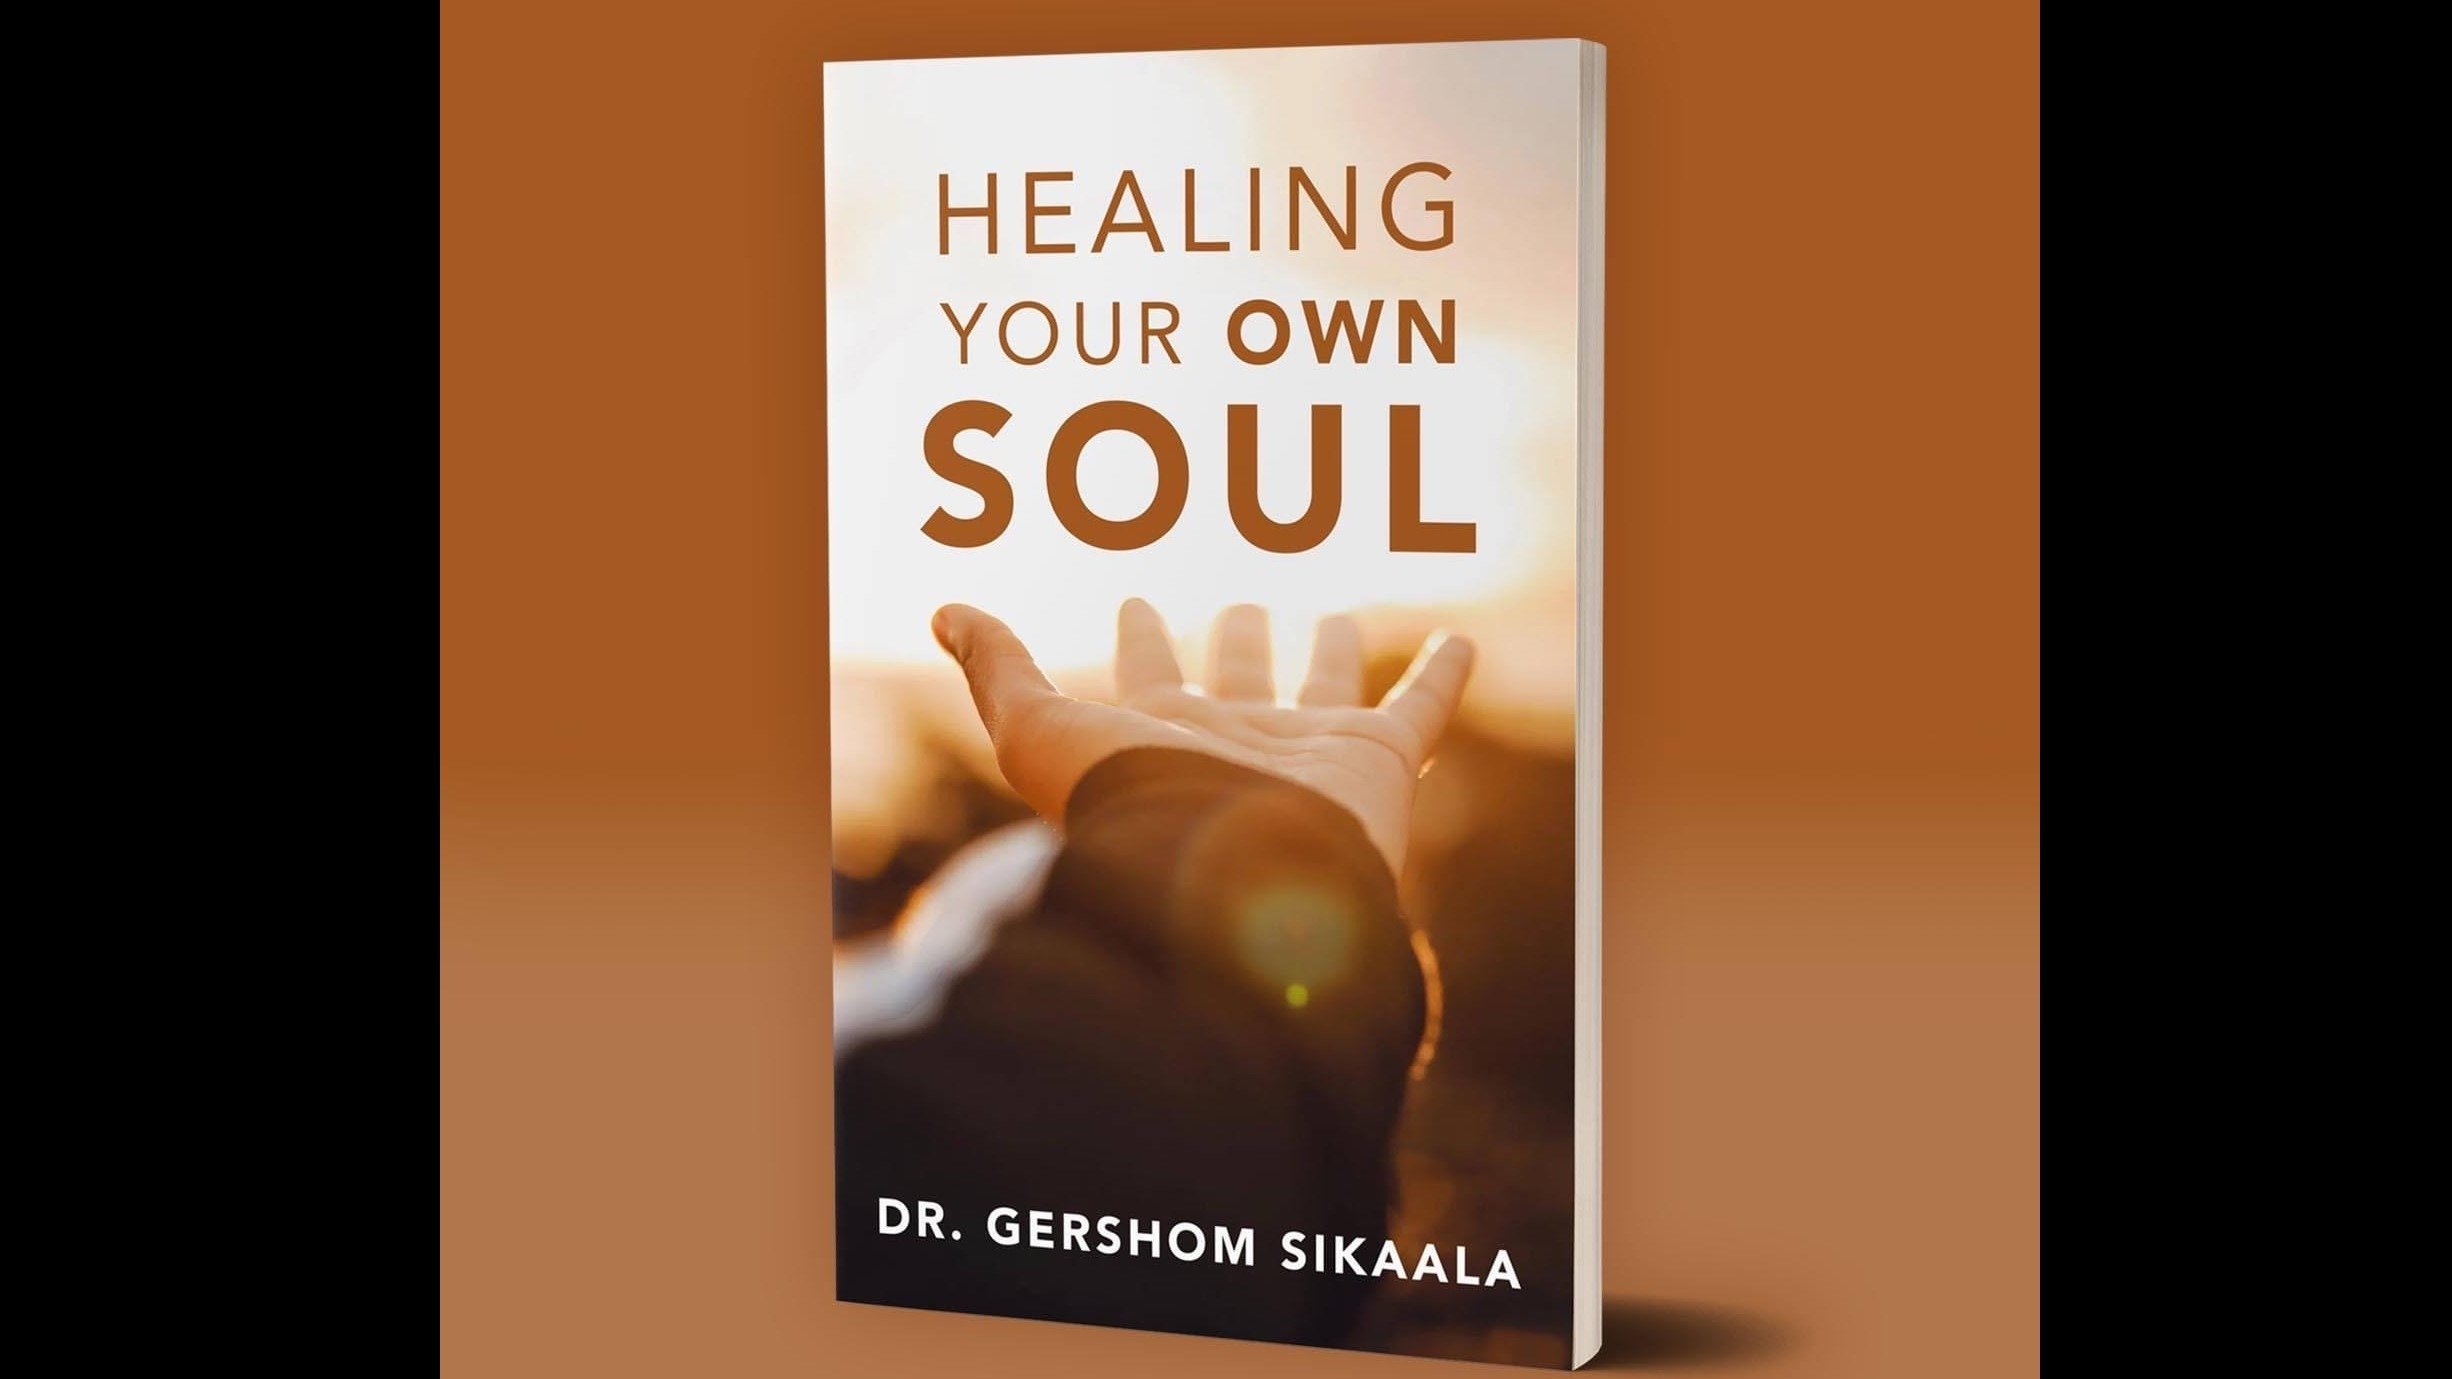 Learn How To Heal Trauma & Find Self-Love From A Best-Selling Christian Author